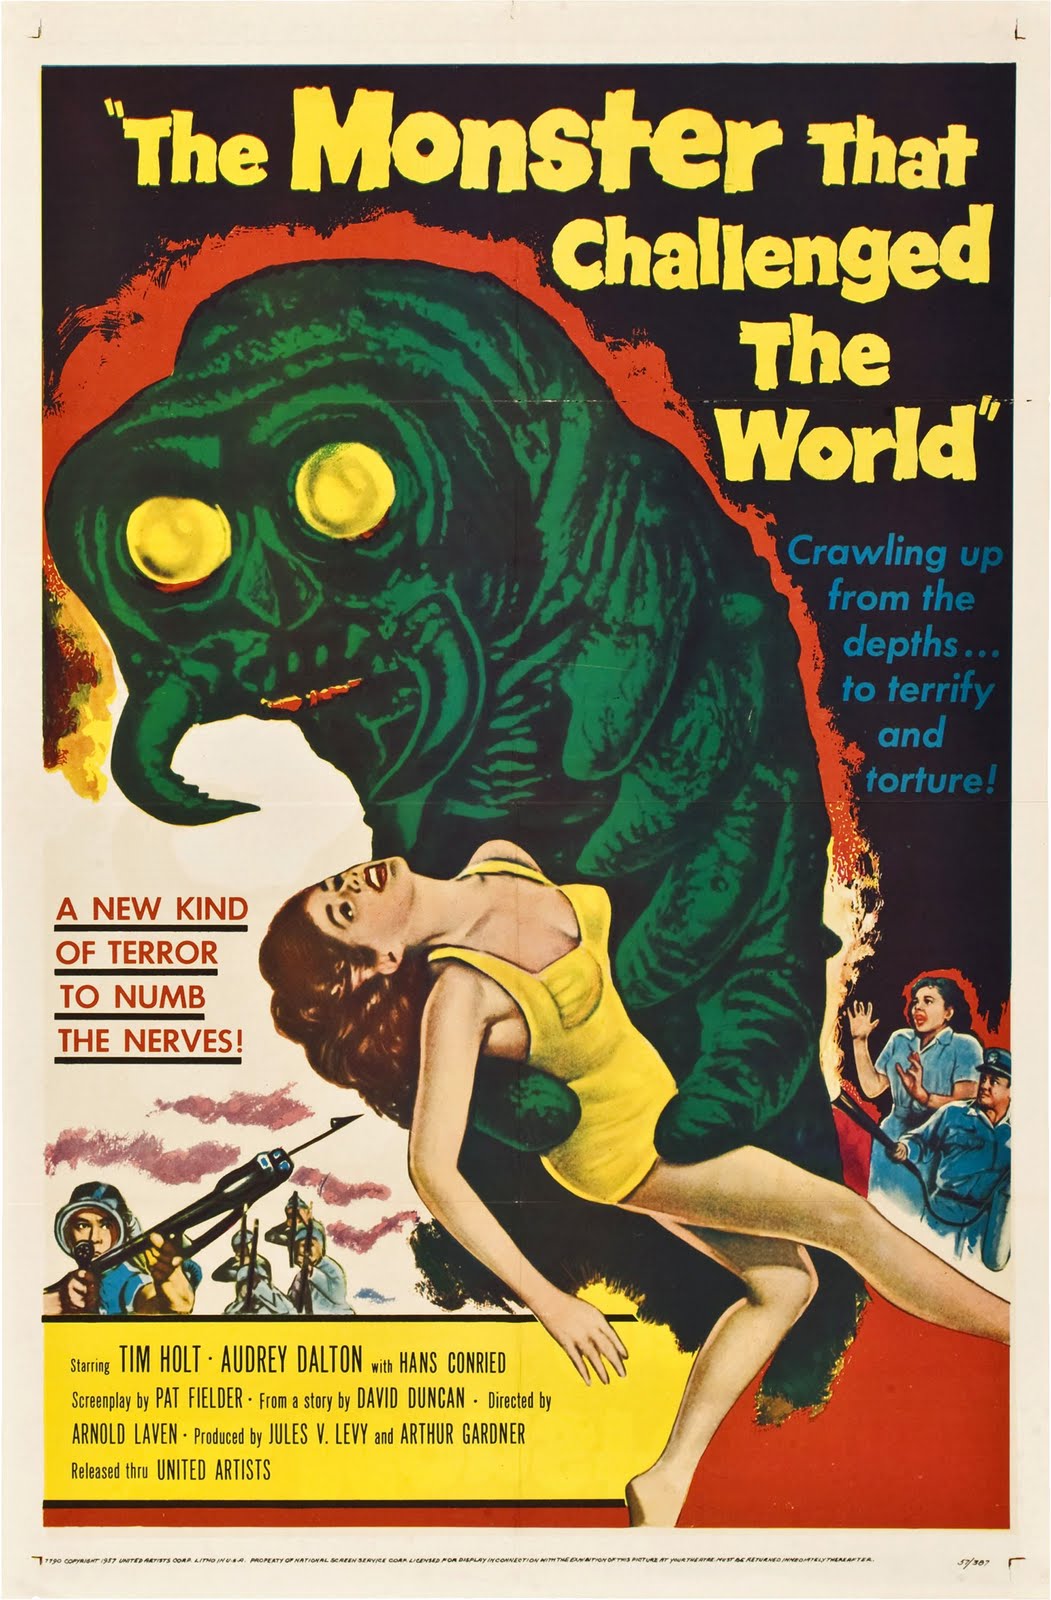 Old Retro Horror Film Posters - Monster Challeneged World